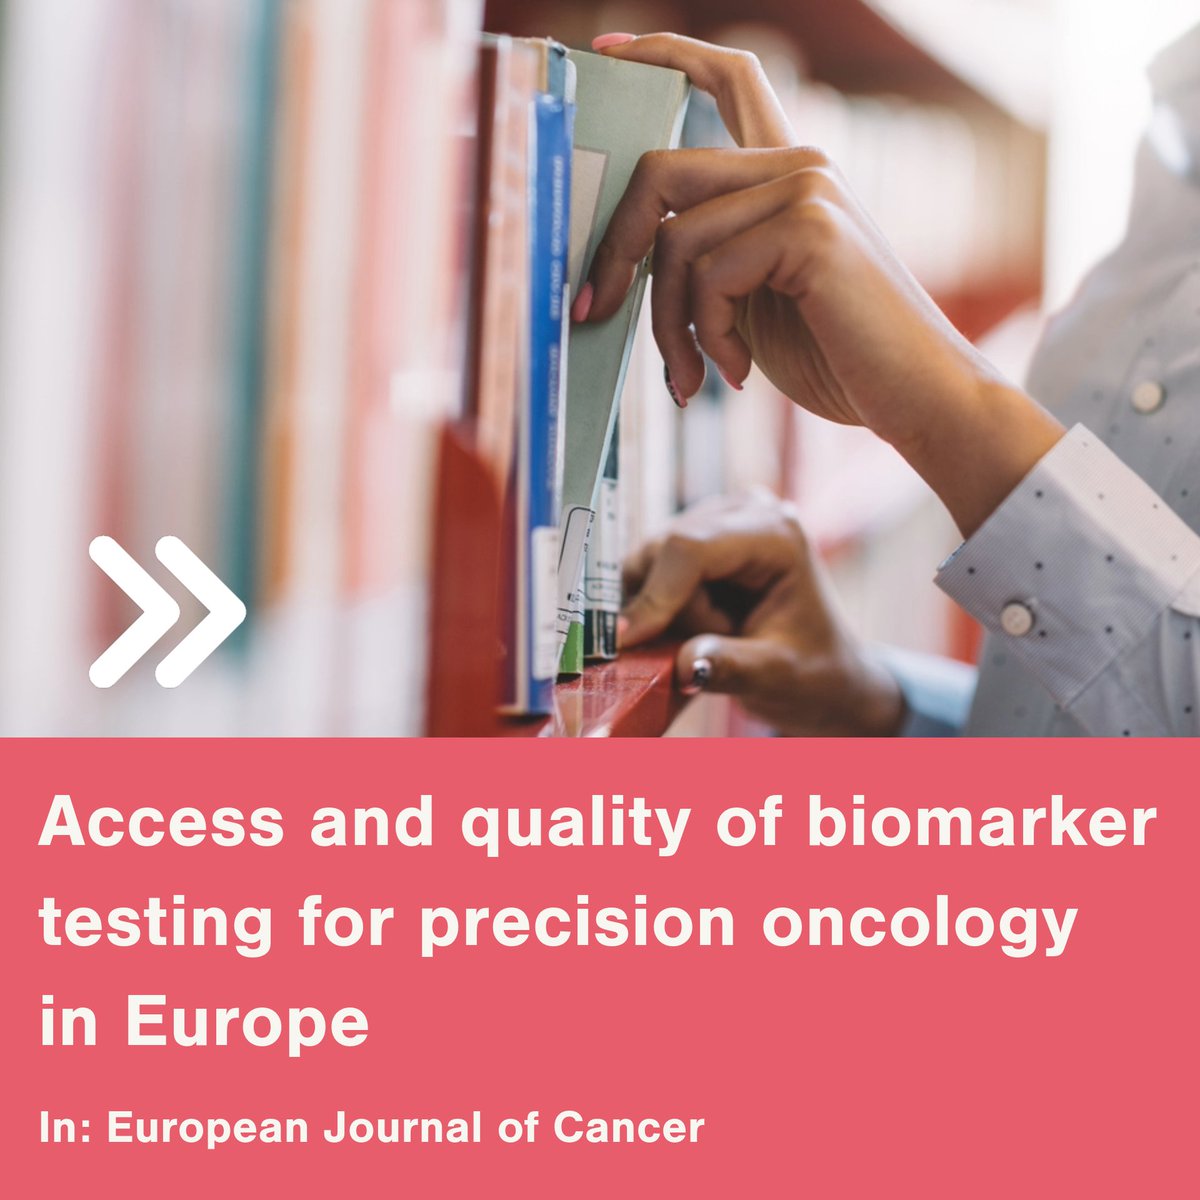 🔬📚'Access and Quality of Biomarker Testing for Precision Oncology in Europe'. Explore #CancerPrecision in Europe. Key findings: access, funding challenges, NGS use, & quality assurance. Action needed for equal access to innovative therapies🔗cutt.ly/UwEiA4S3 #Healthcare